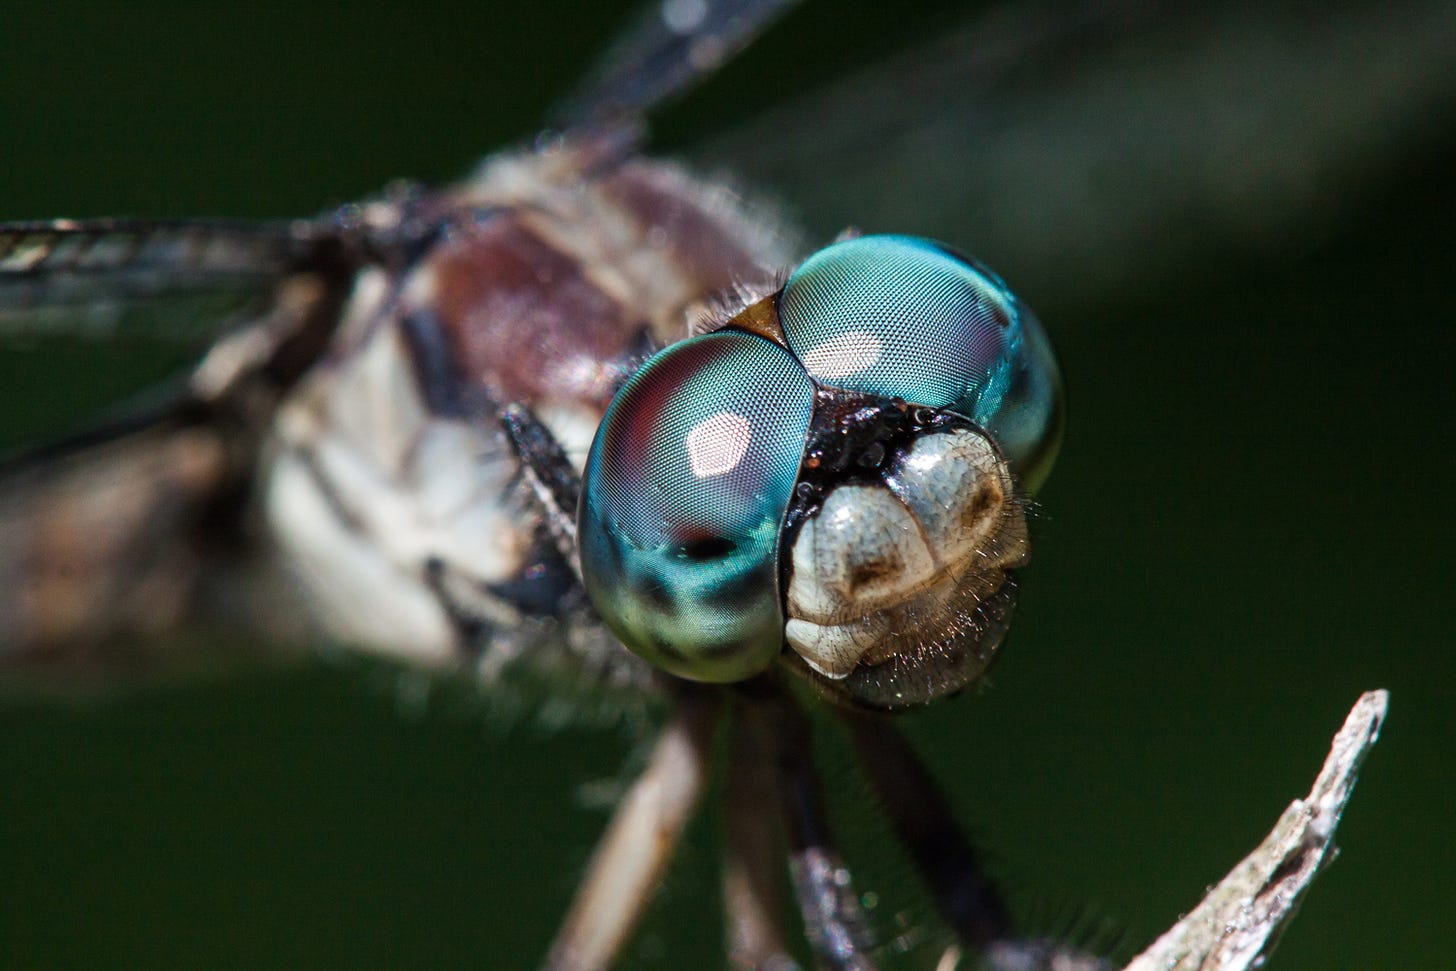 Amazing dragonfly eyes | Mike Powell